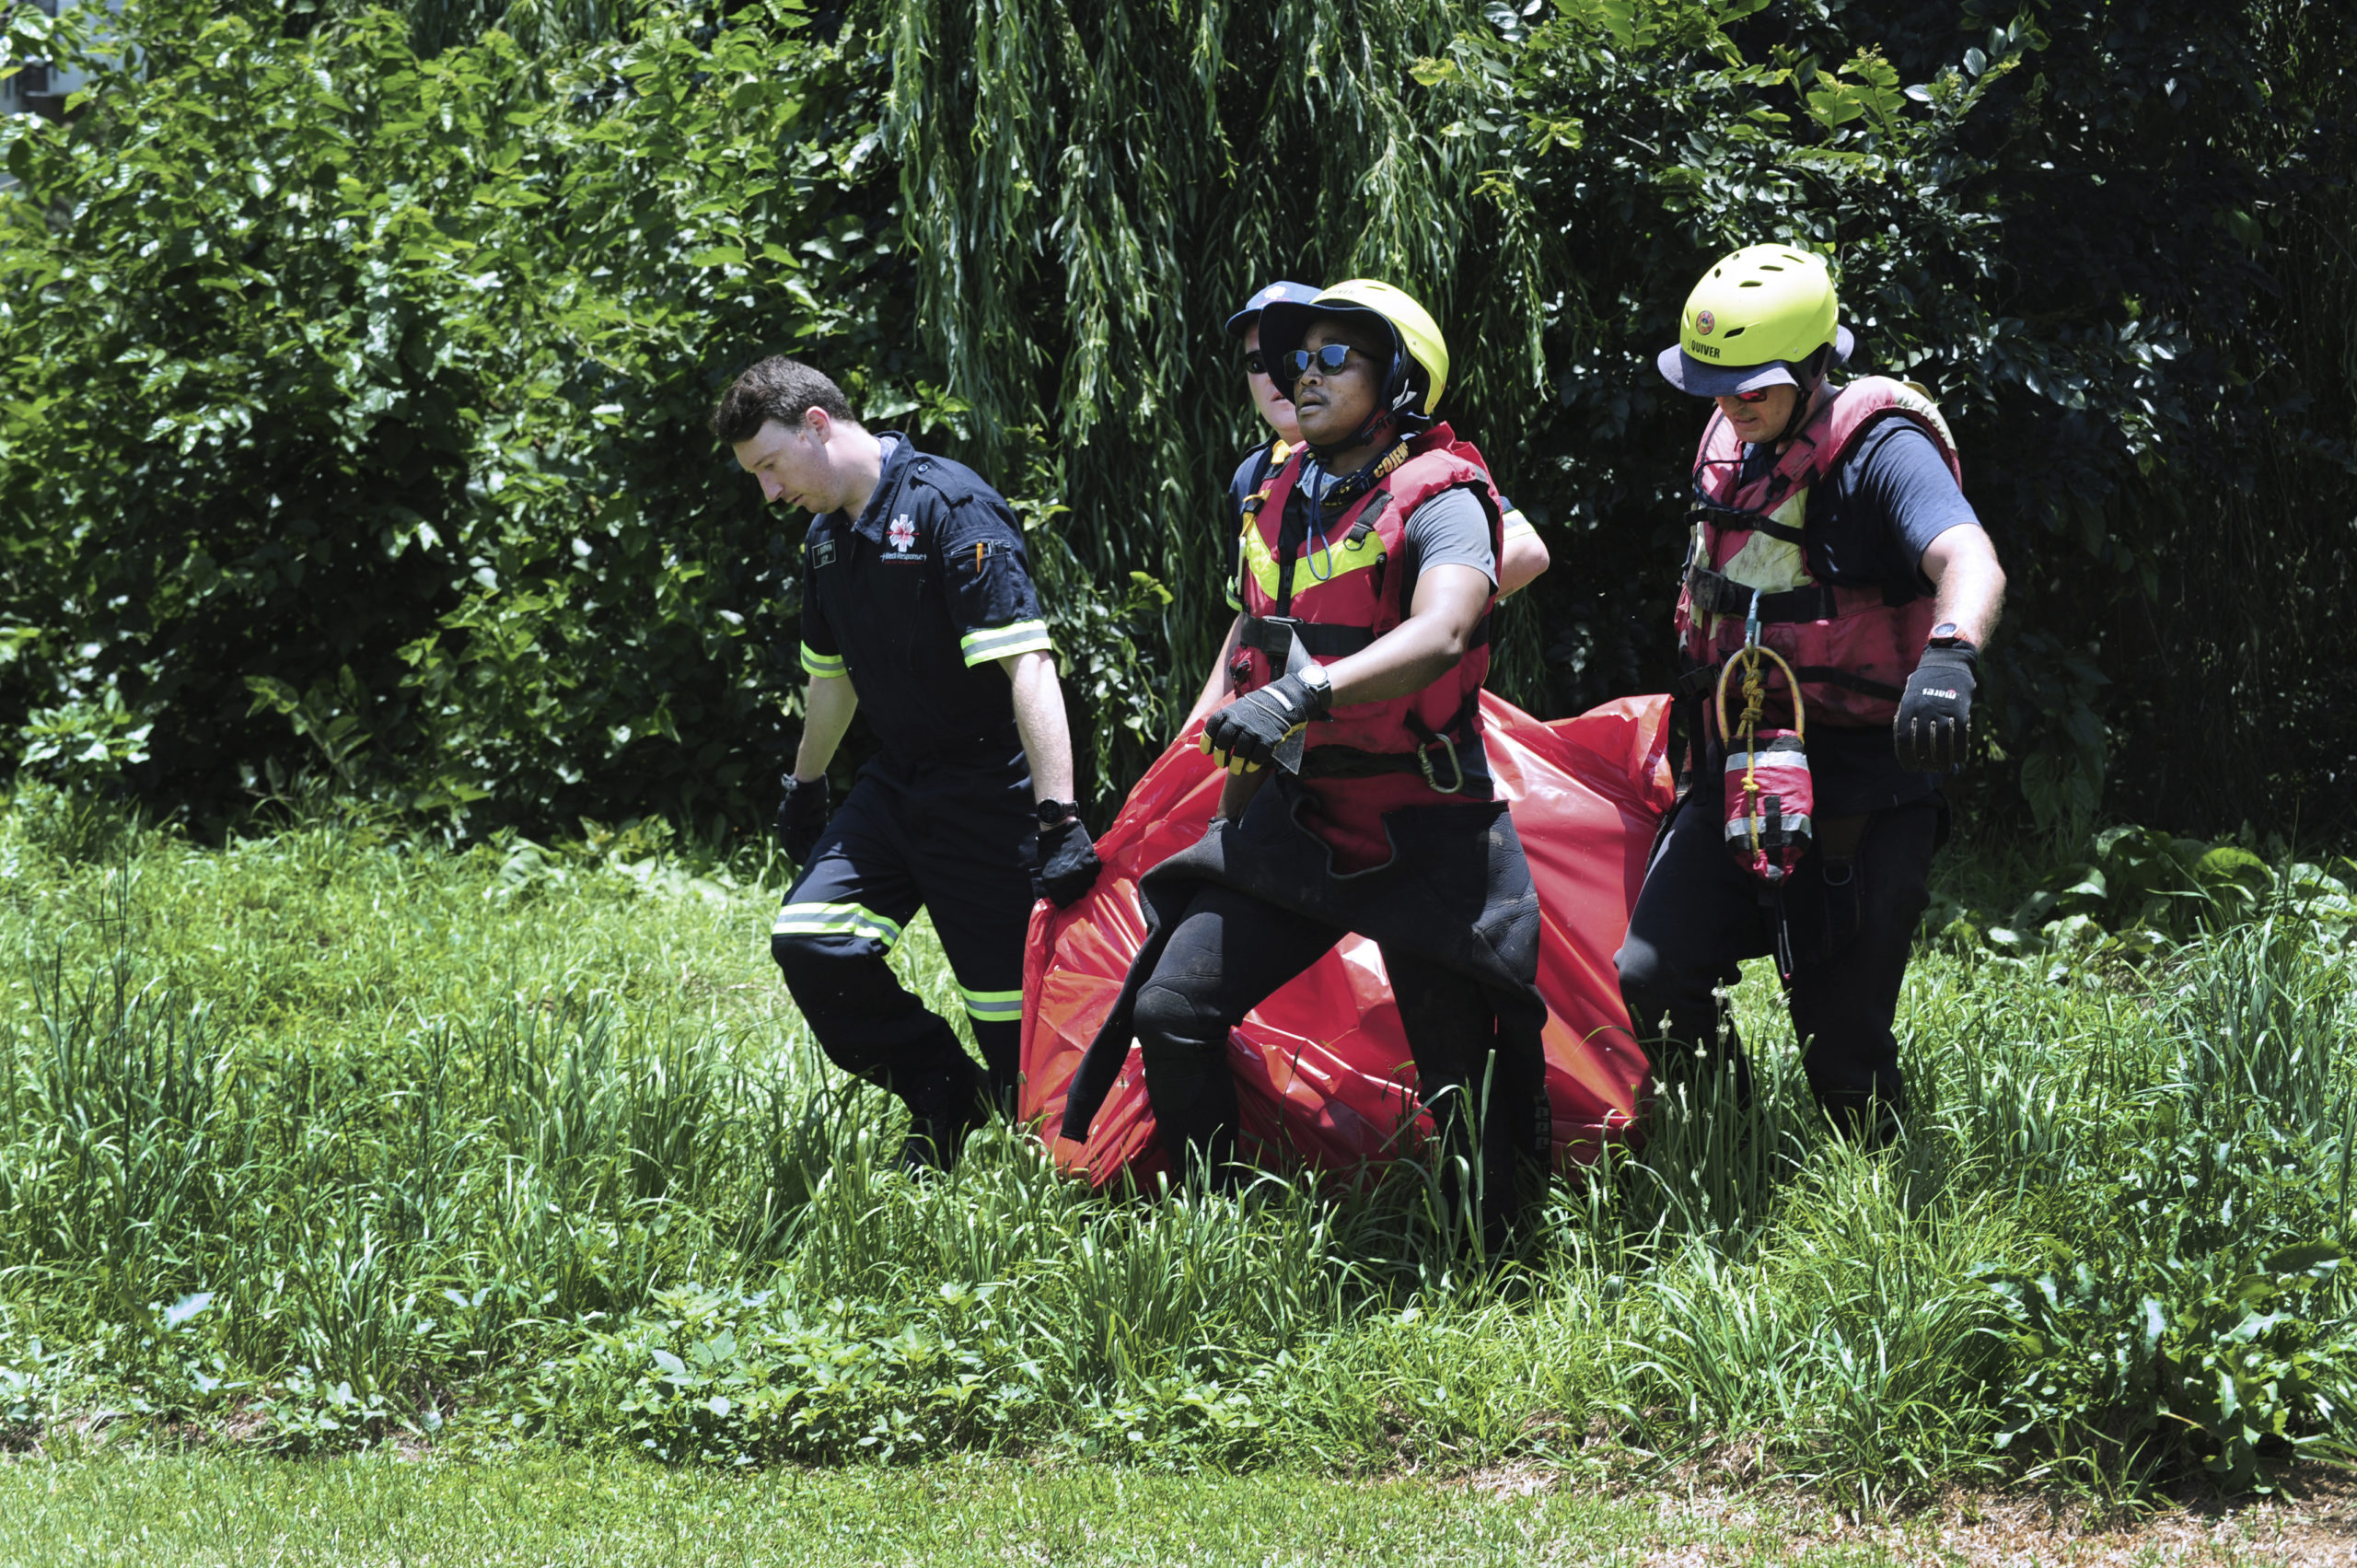 Rescuers carry the body of a flood victim that was retrieved from the Jukskei river in Johannesburg, South Africa, on Sunday.